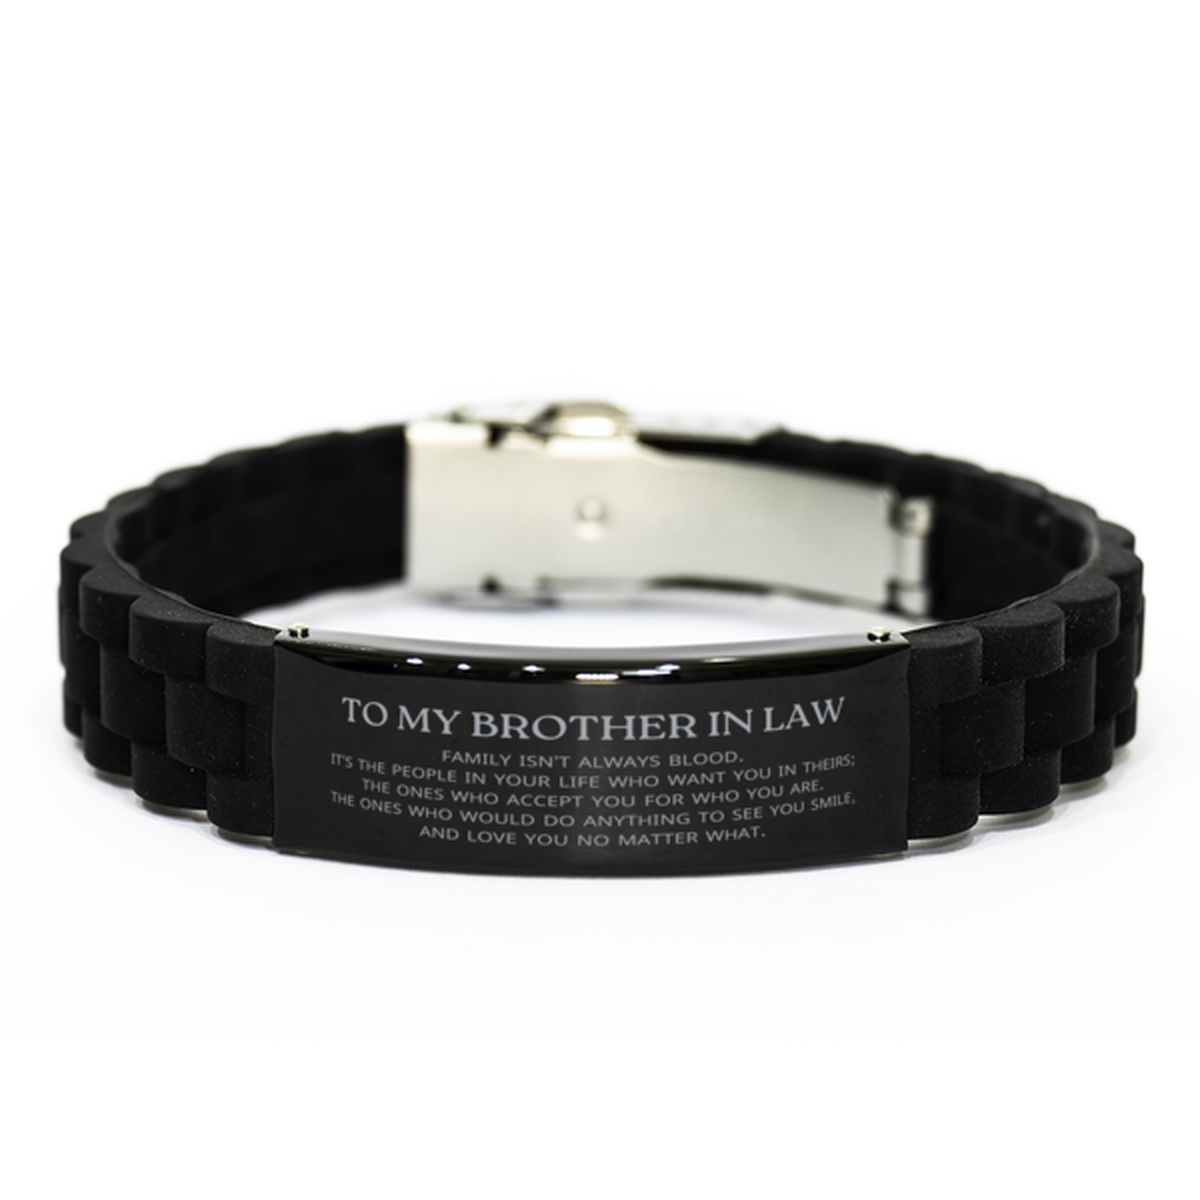 To My Brother In Law Gifts, Family isn't always blood, Brother In Law Black Glidelock Clasp Bracelet, Birthday Christmas Unique Present For Brother In Law